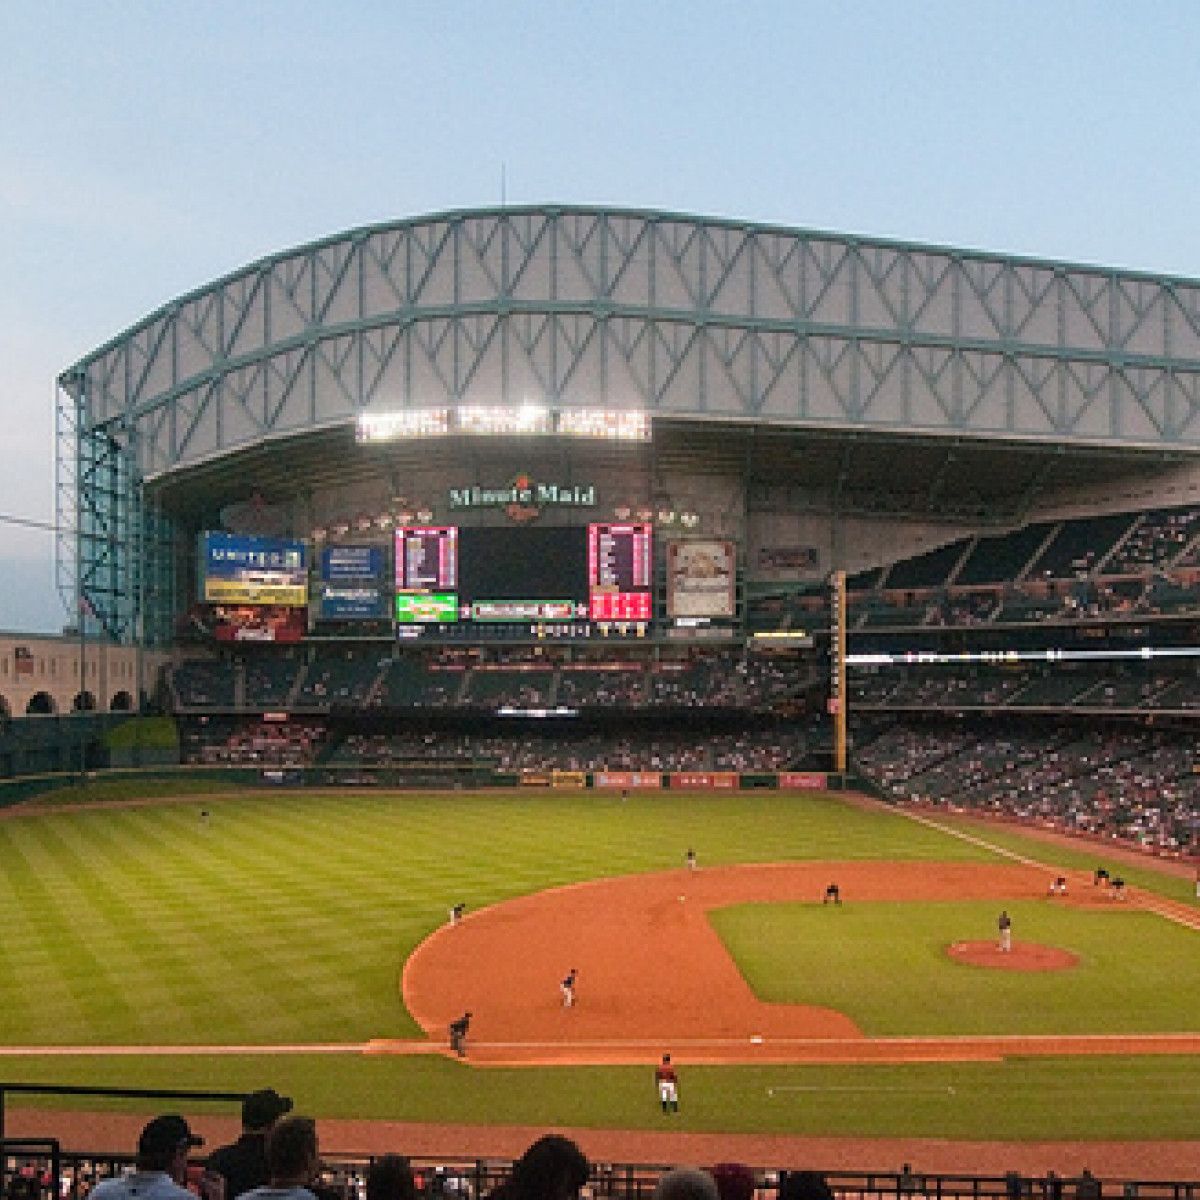 Minute Maid Park, previously known as The Ballpark at Union